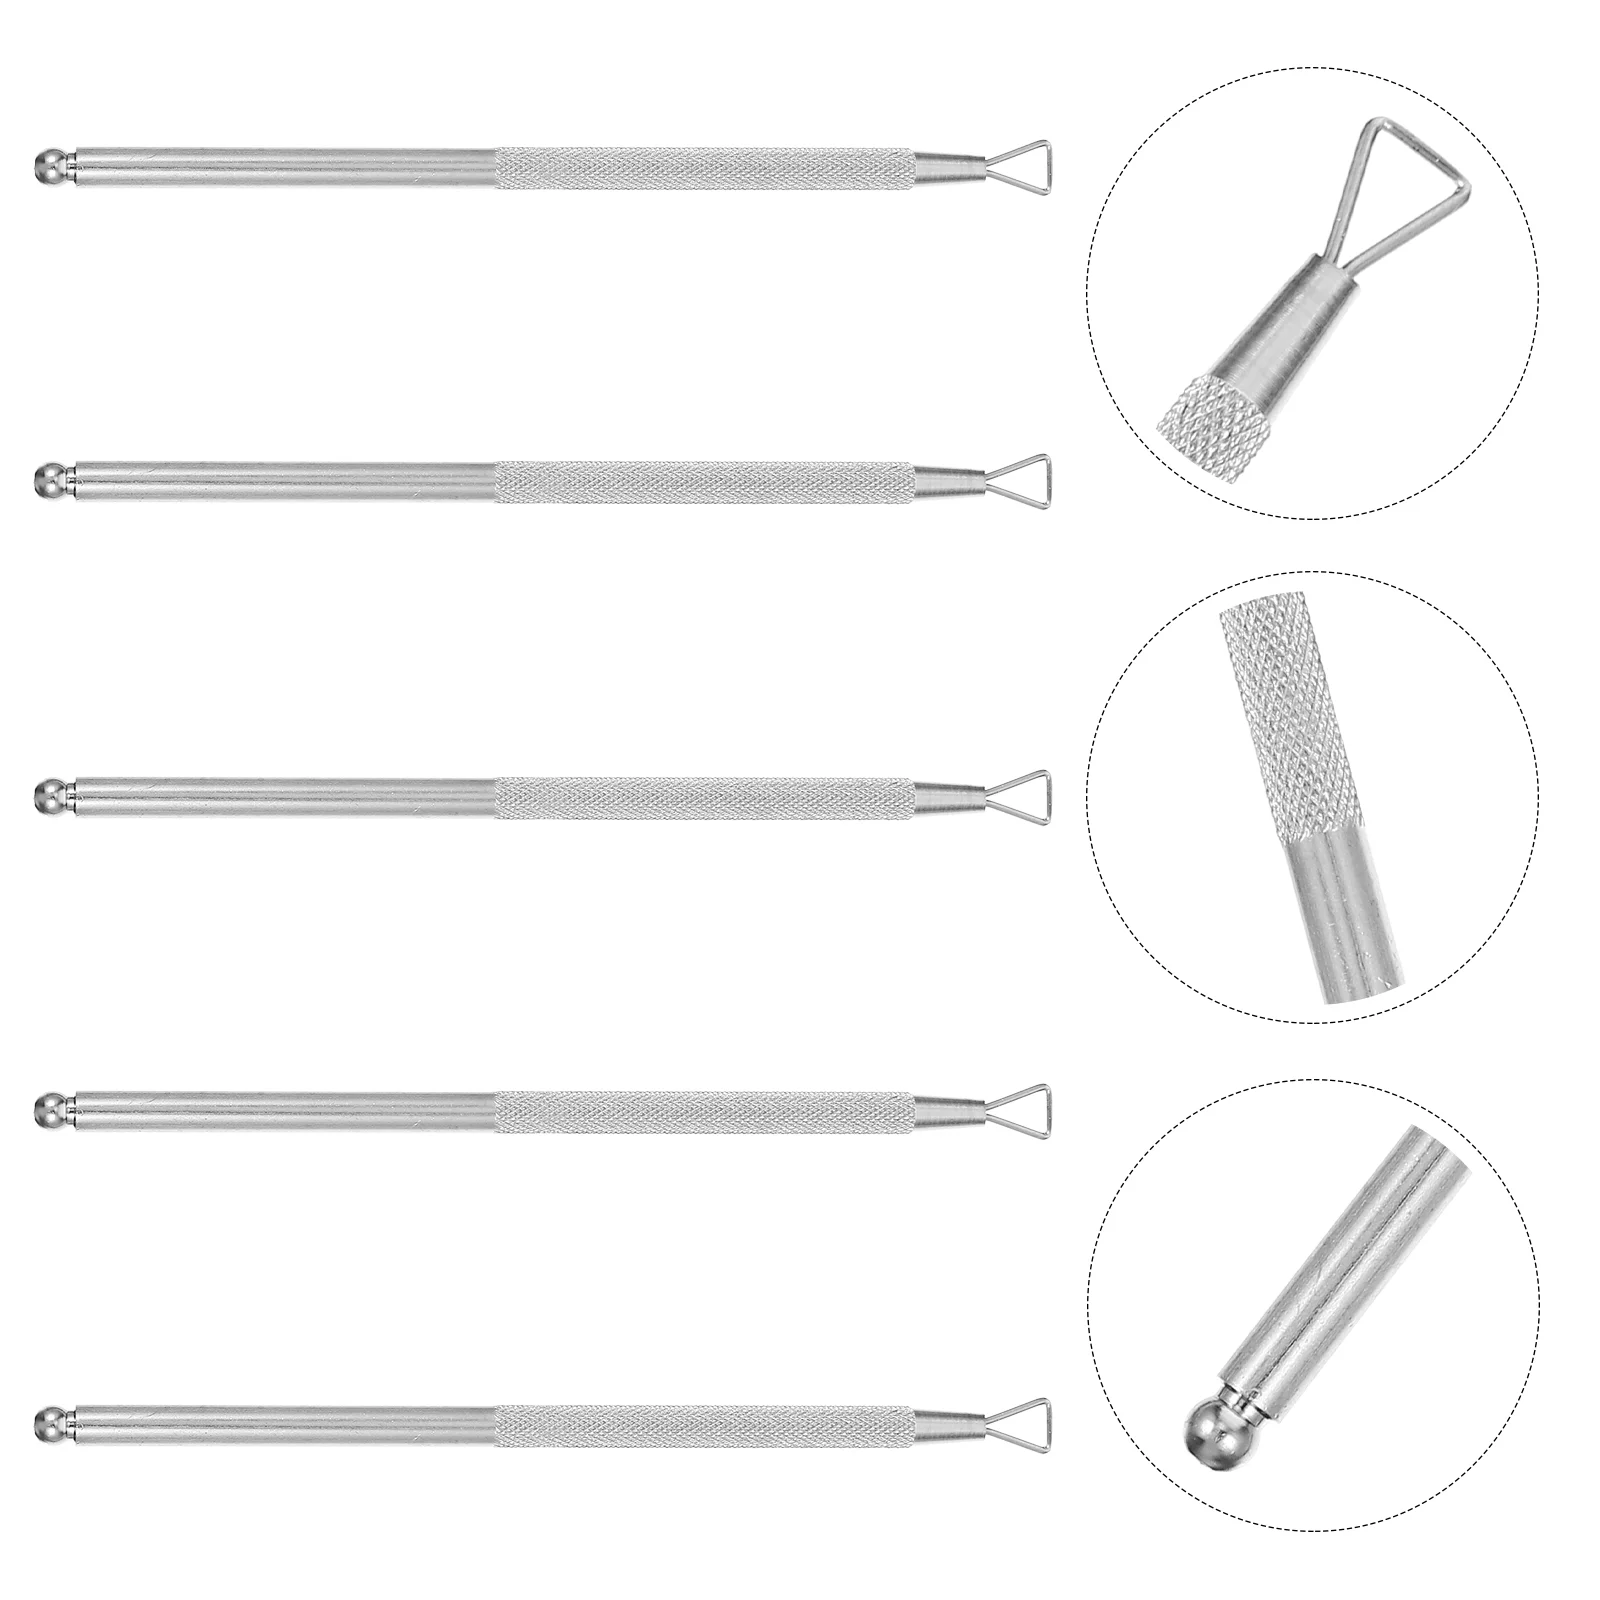 Nail Cuticle Remover Pusher Polishtool Scrapermanicure Peeler Tickets Lottery Off Scratch Practical Dip Tools Pedicure Steel